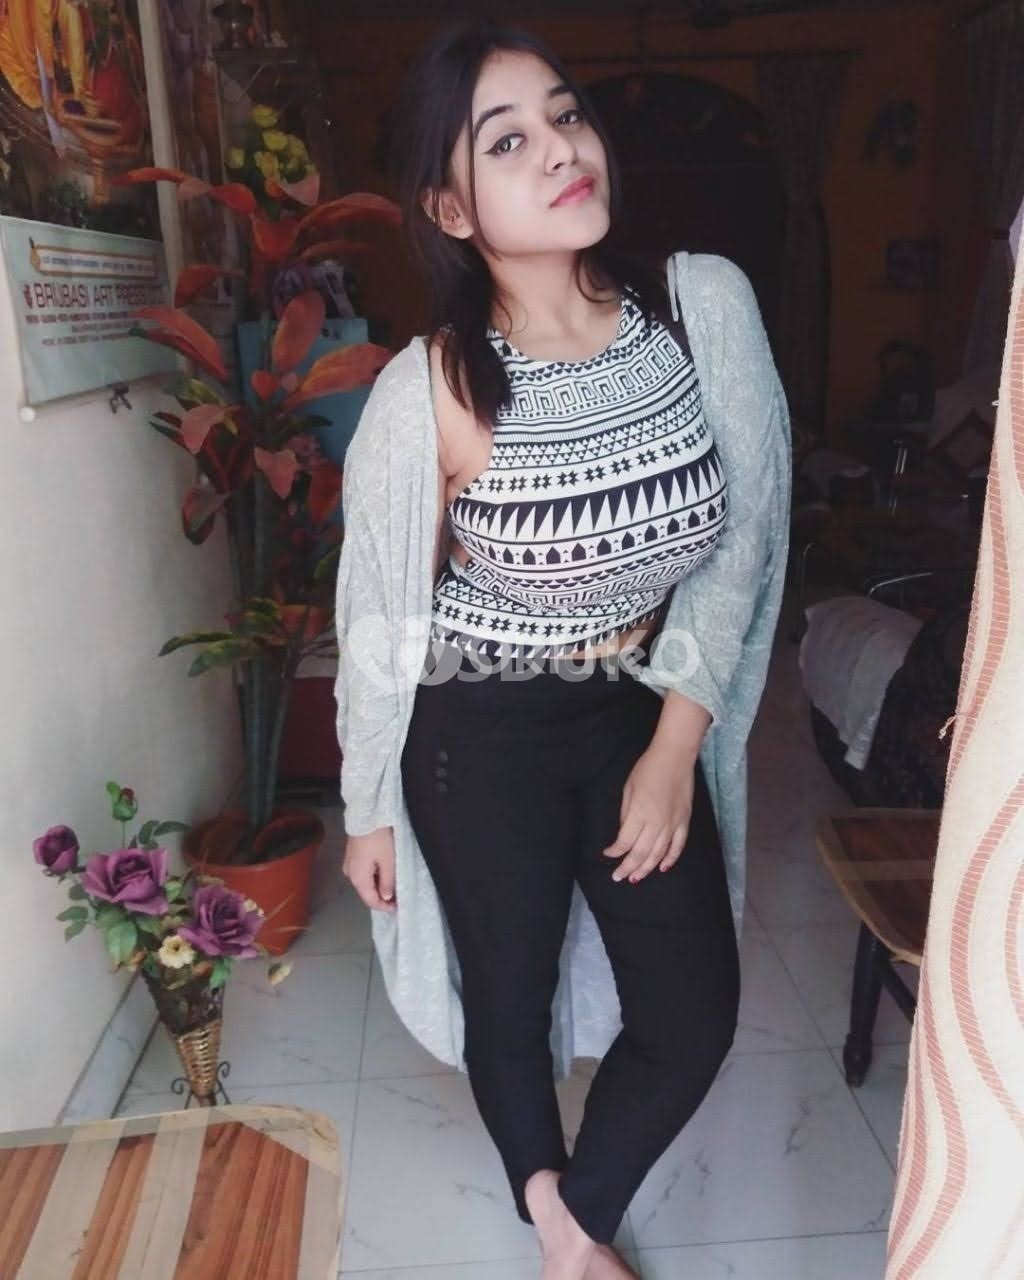 (Amritsar) Today Low Price Safe High profile escort All Type Sex All Area Availability Safe